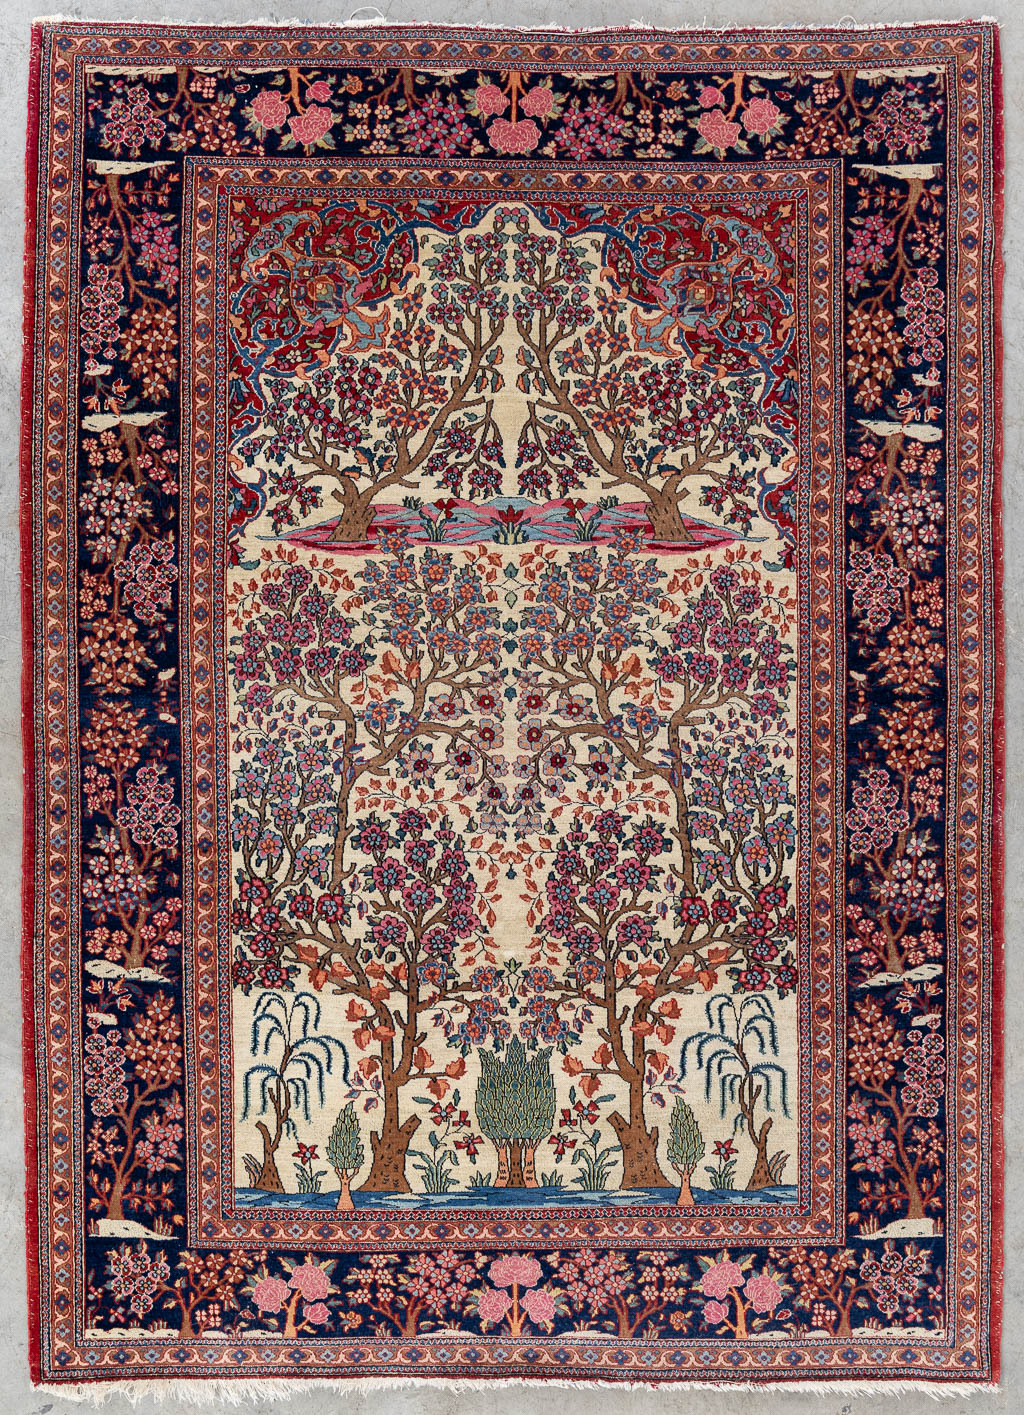 Lot 216 A Fine oriental hand-made and antique carpet, Isfahan. (L:204 x W:146 cm)